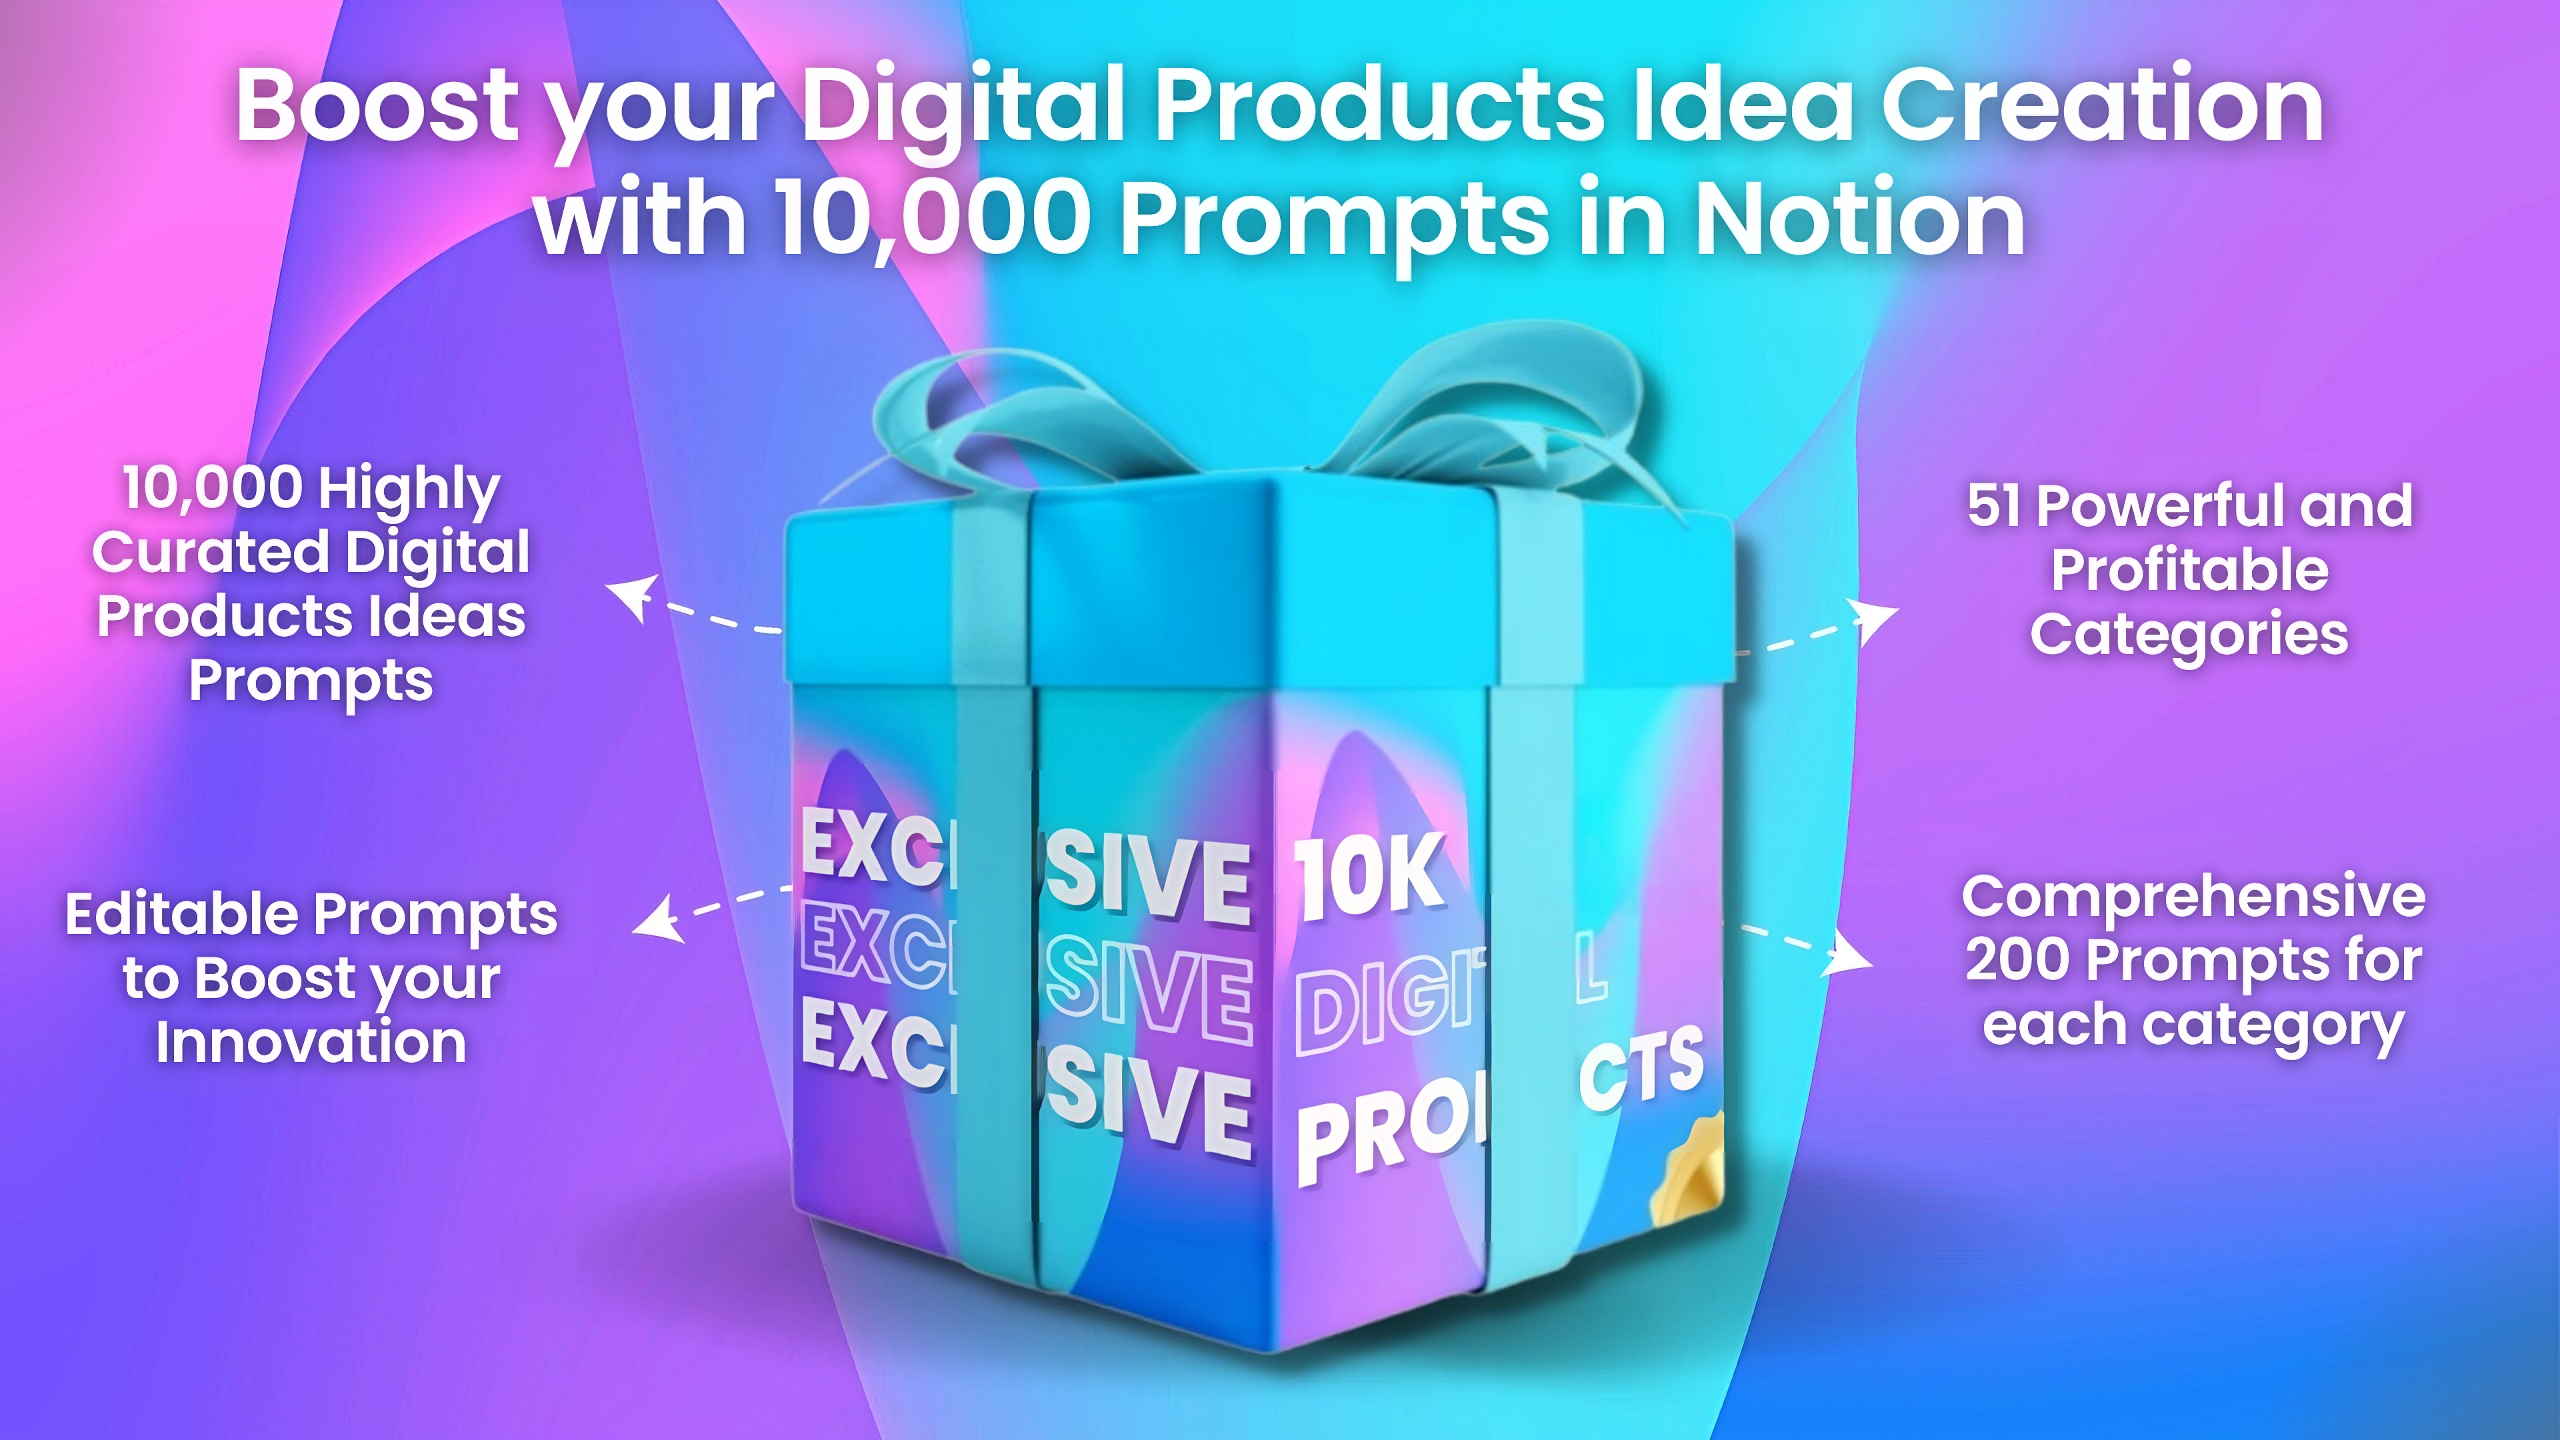 startuptile 10,000+ Digital Products Ideas Prompts -Boost your idea for digital product creation